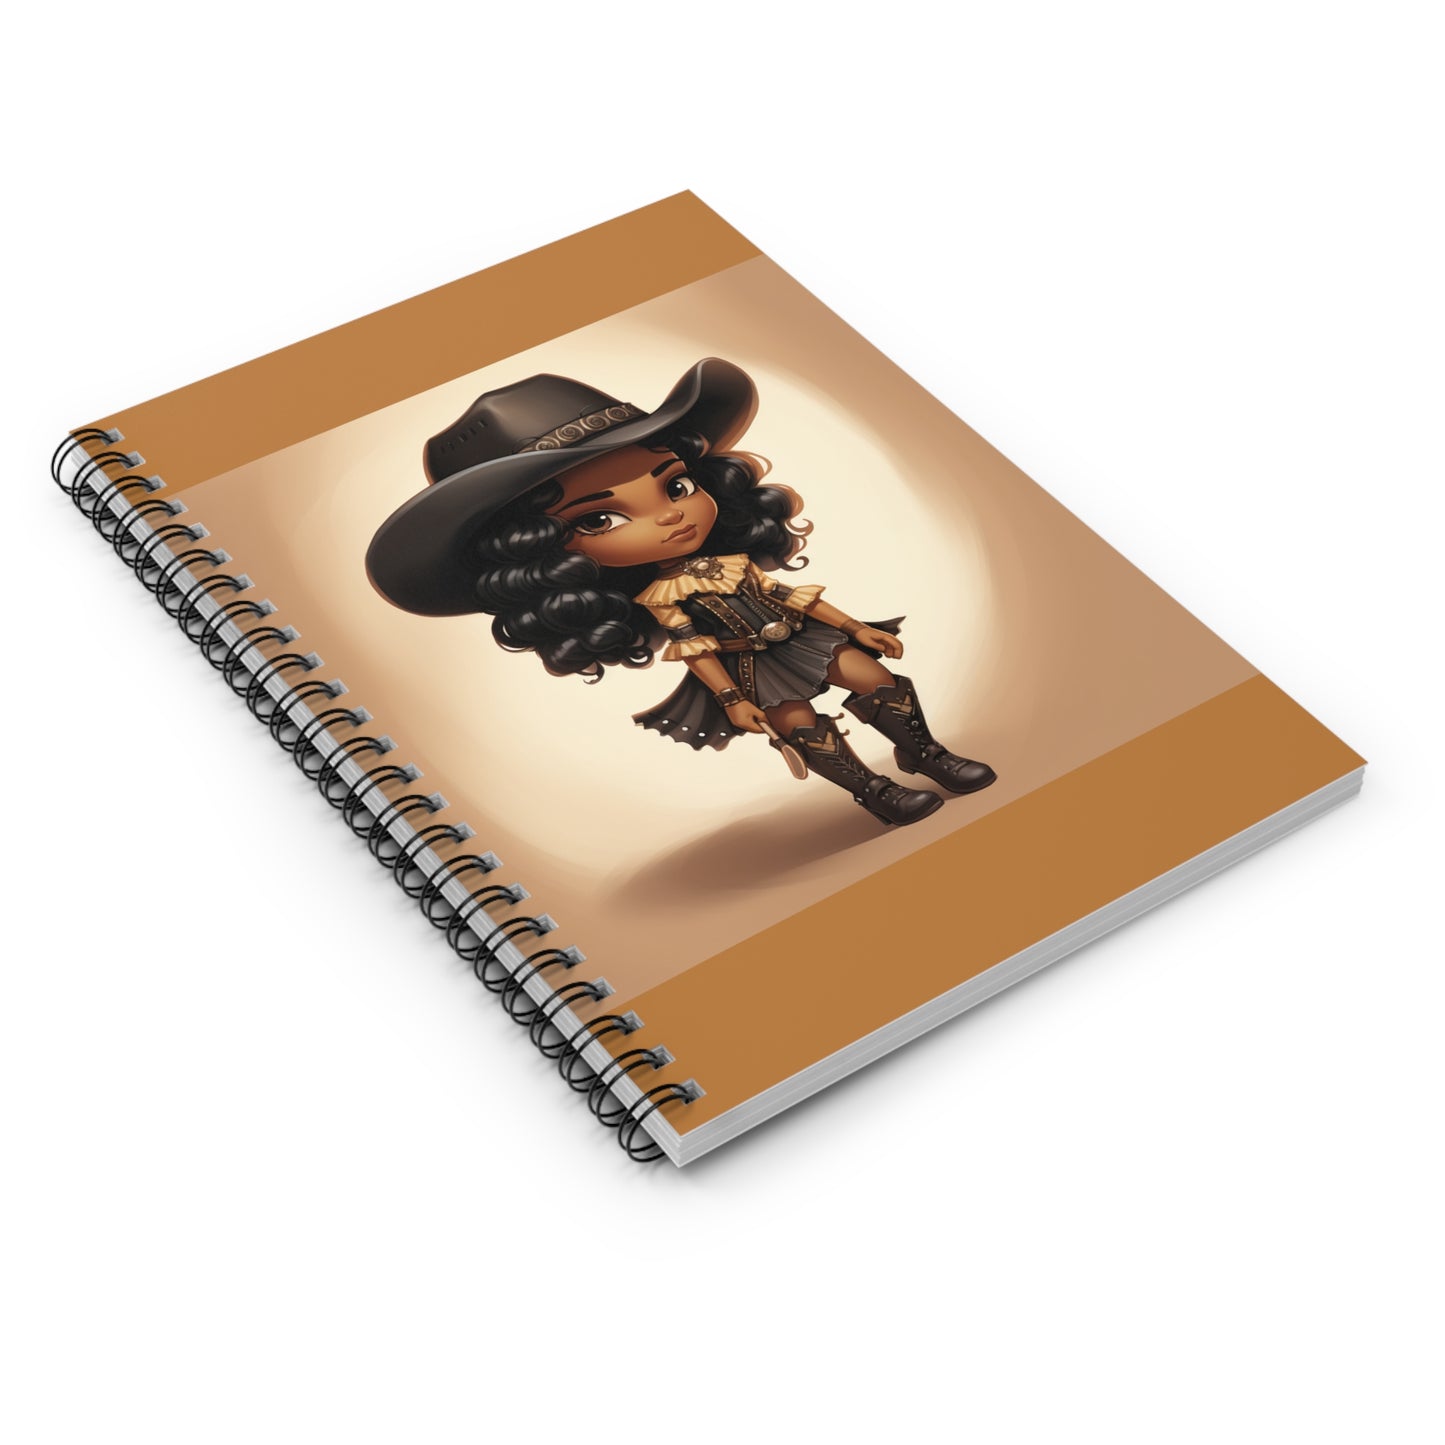 African-American Country Cowgirl with Boots and all School Hobby  Sport Mindset Mindfulness Journal Spiral Notebook - Ruled Line